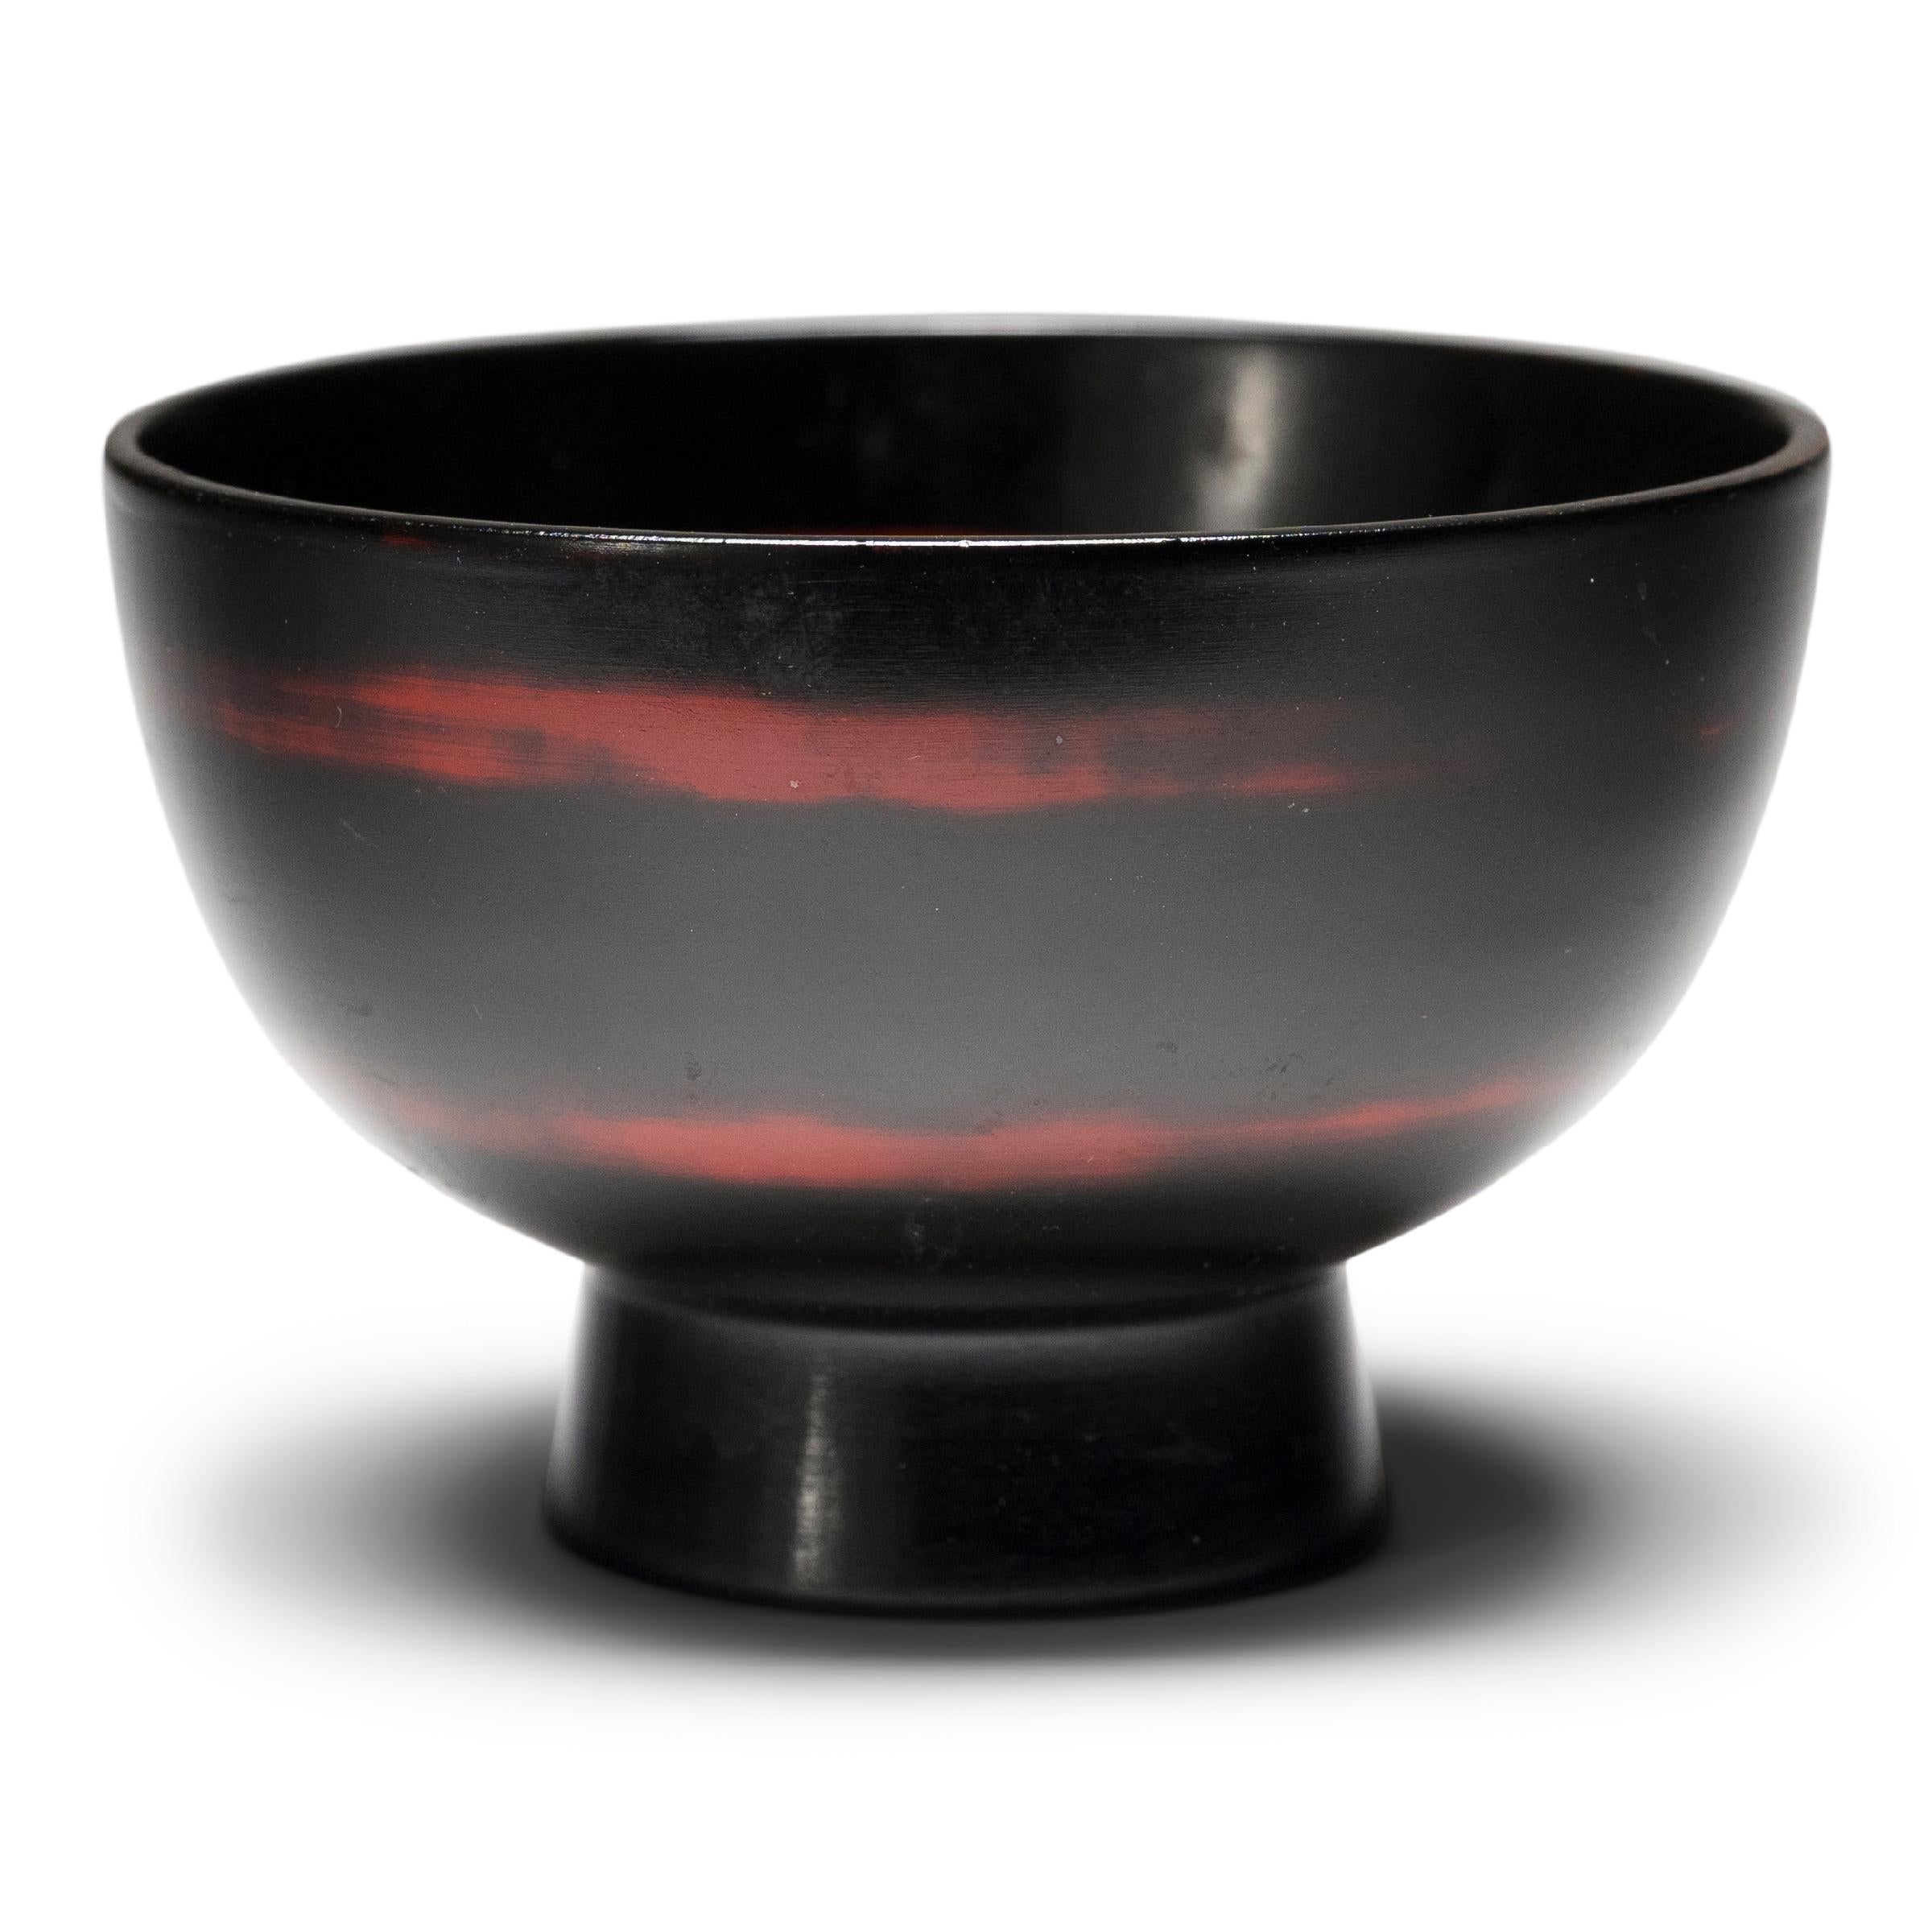 This set of four lacquered rice bowls is simply shaped with gently tapered sides and a footed base. A rich, glossy black finish coats the bowls inside and out, with a contrasting red lacquer spiral detailing on each bowl. Lightweight and compact,